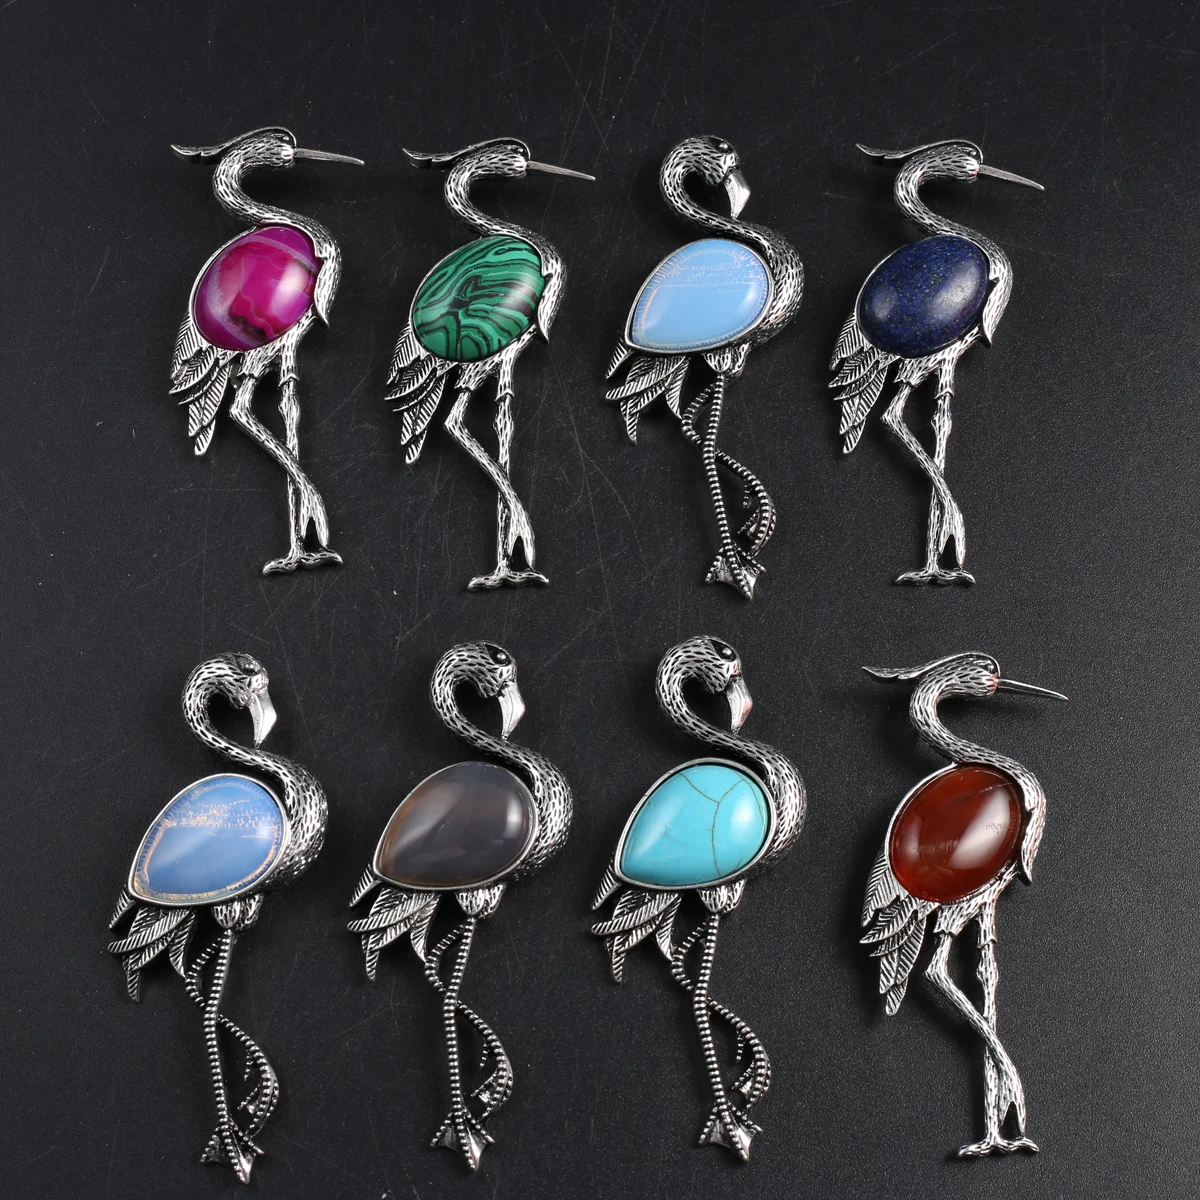 

5 PCS Delicate Alloy Pendant Flamingo Shaped Brooch Inlaid with Natural Semi Precious Stones Charm Jewelry Accessories DIY Gift